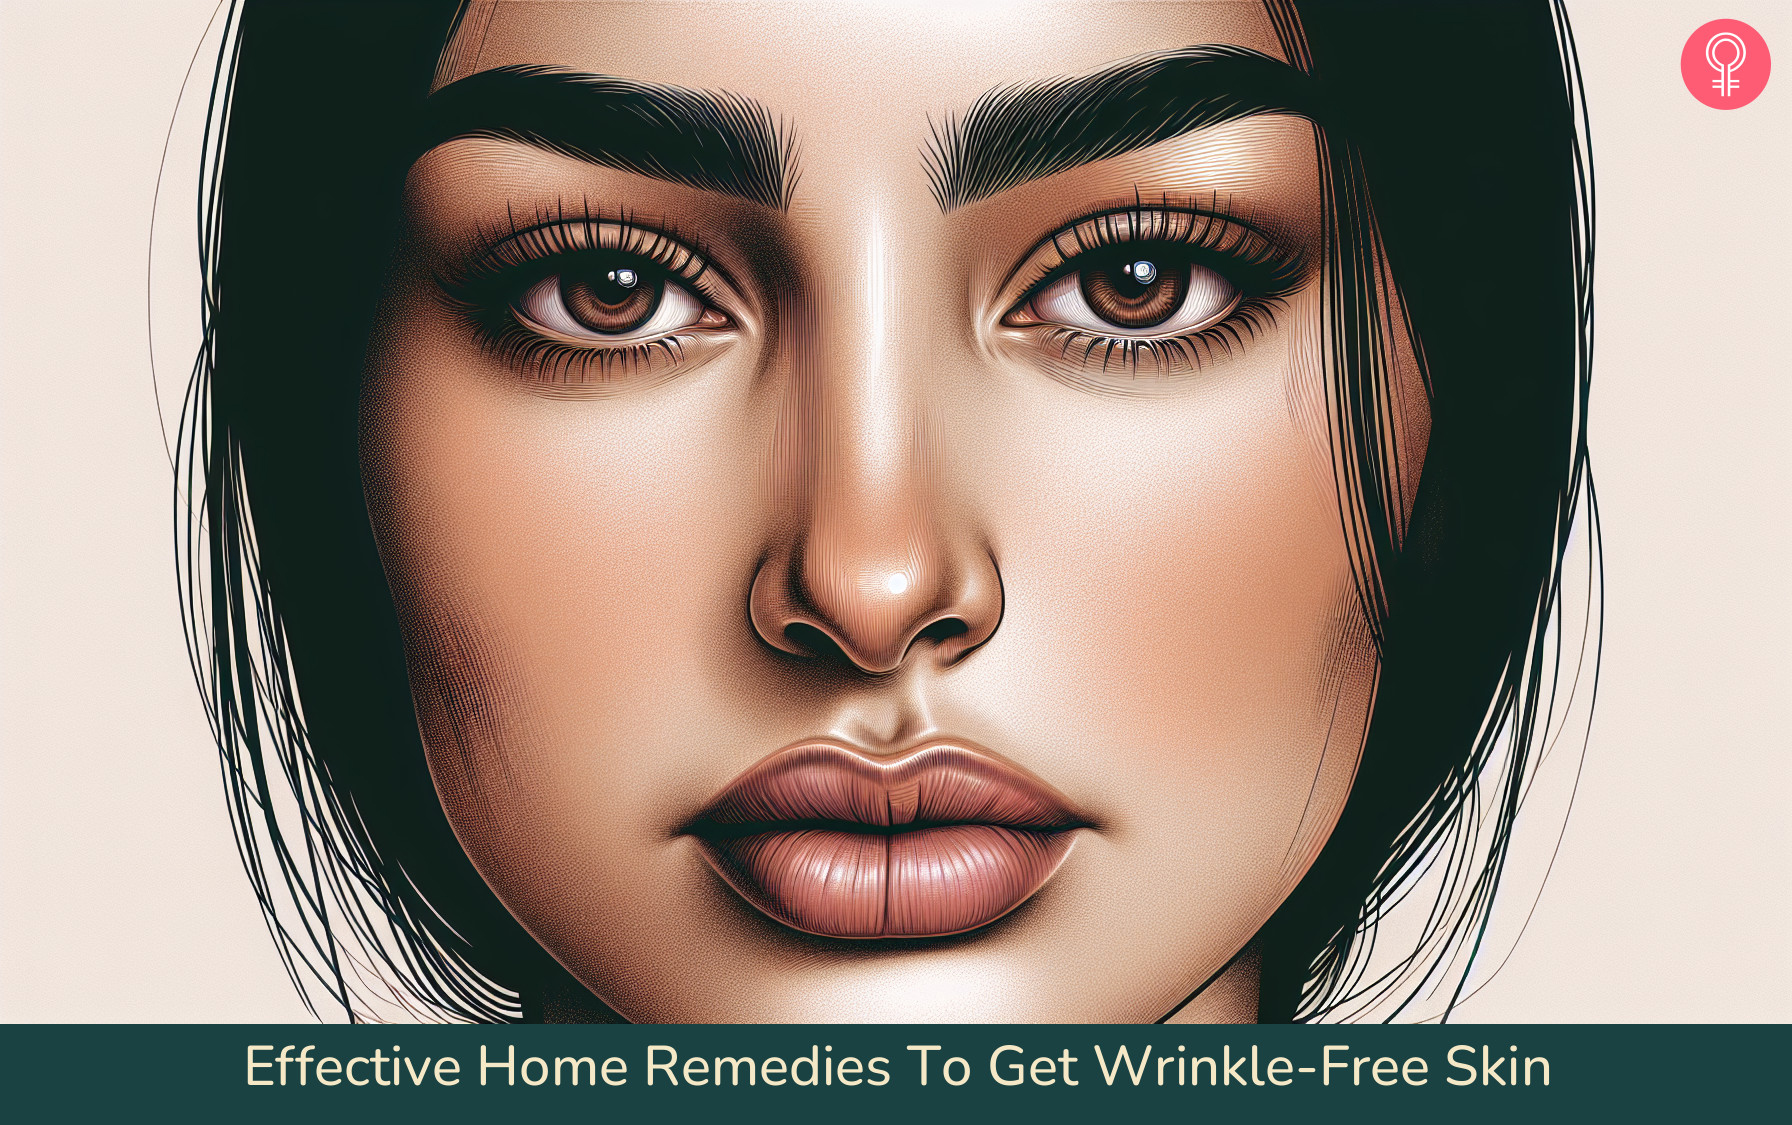 30 Effective Home Remedies To Get Wrinkle-Free Skin